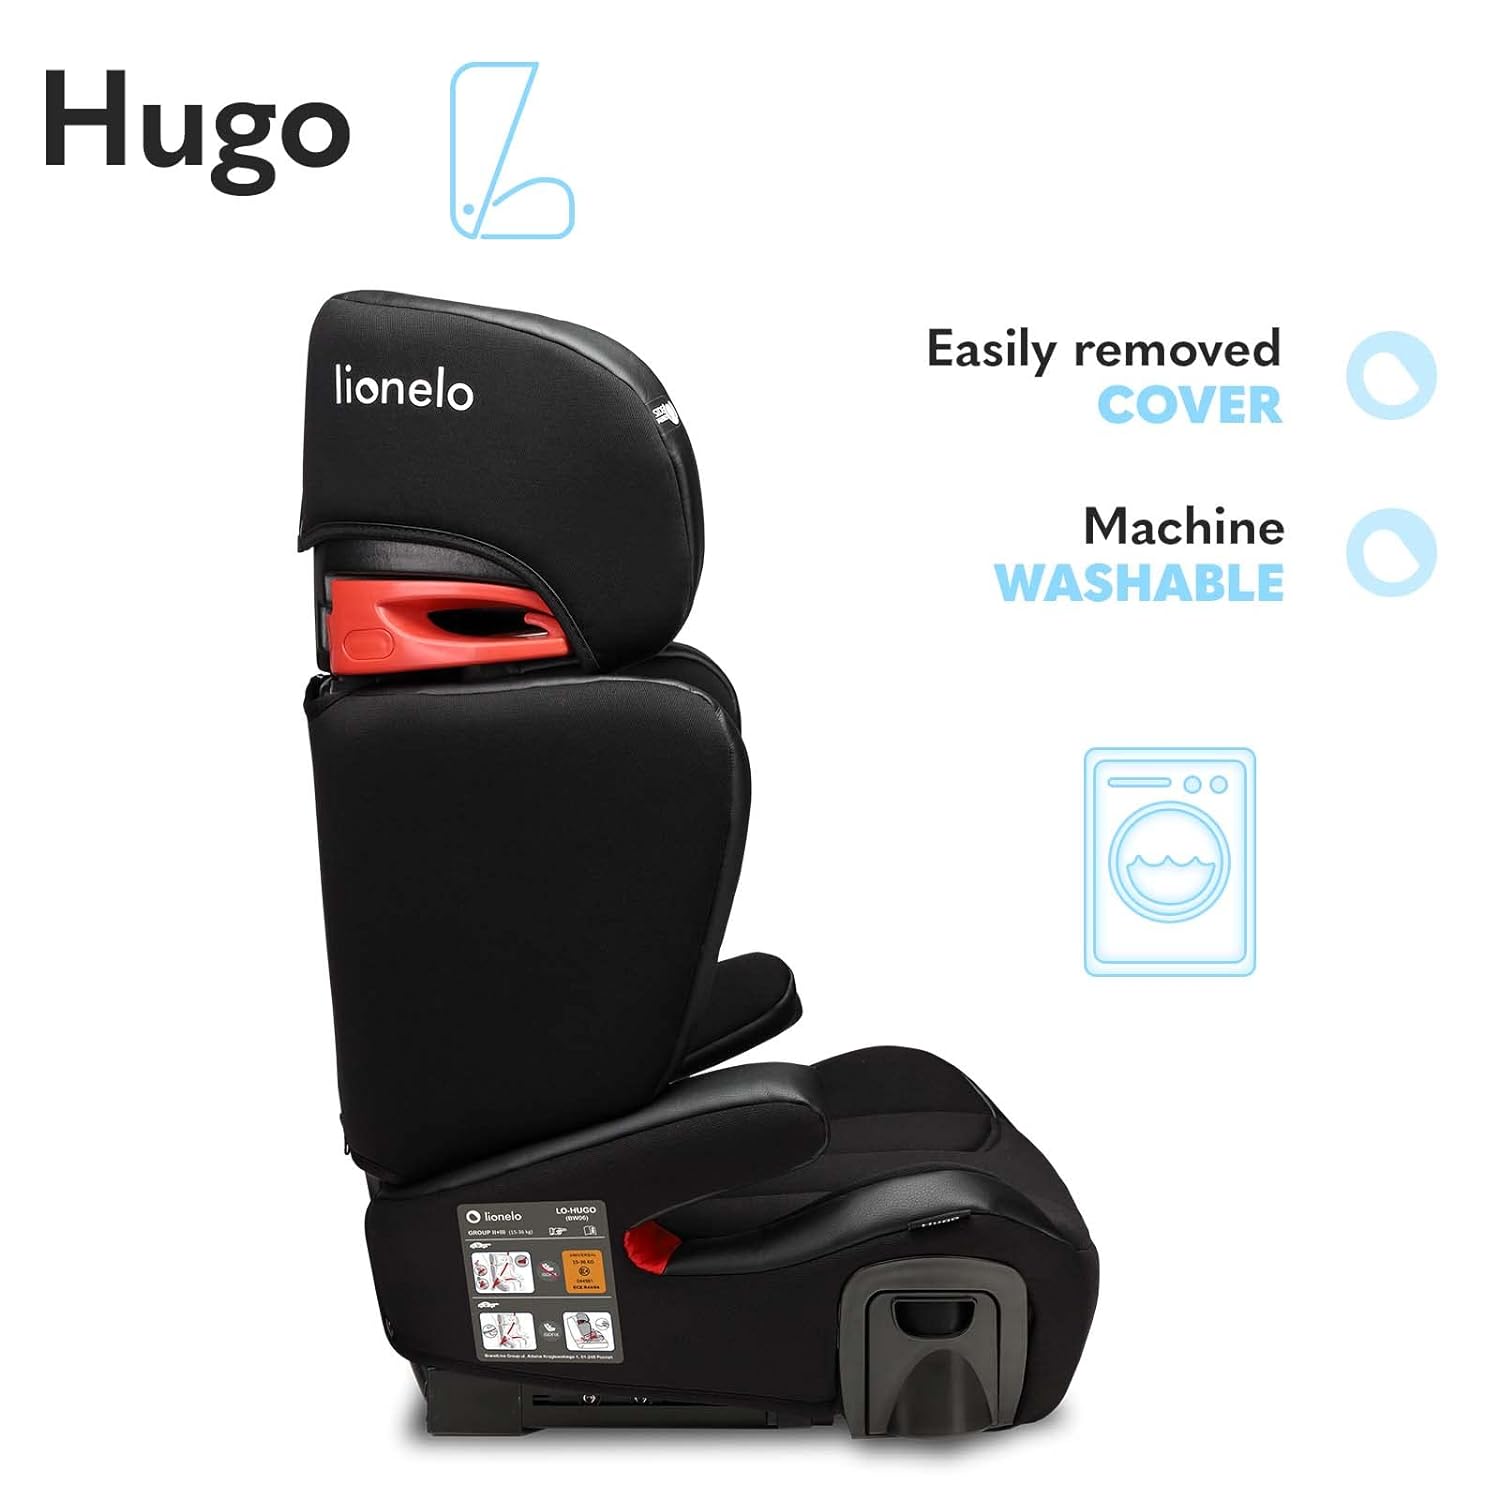 LIONELO Hugo Child Seat 15-36 kg Car Seat, Group 2 3, Isofix, Side Protection, Adjustable Headrest, Two Cup Holders, Can be Mounted with Vehicle Belts